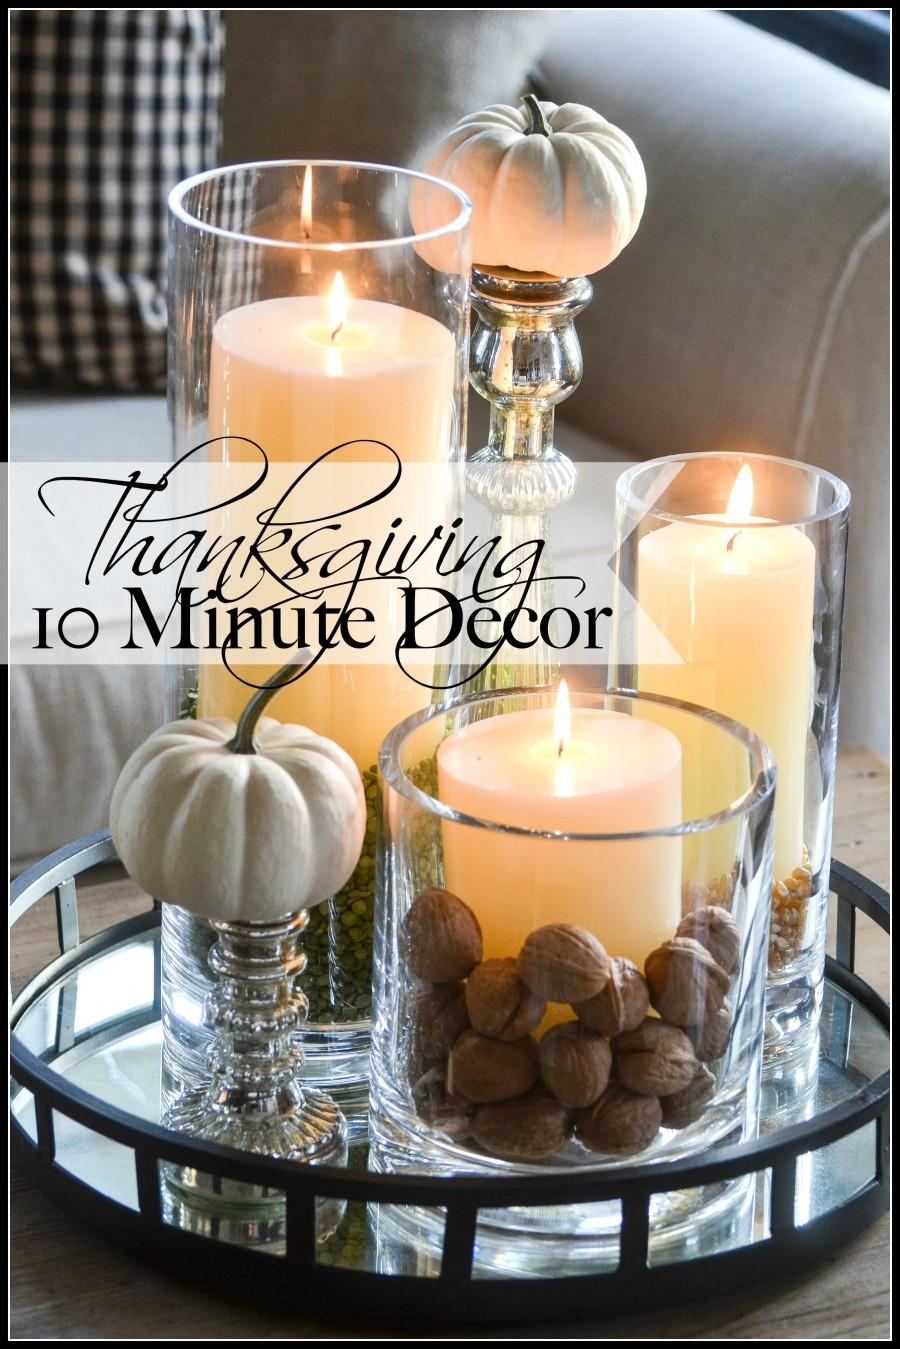 Thanksgiving Video Ideas
 8 AMAZING IDEAS FOR THE BEST THANKSGIVING TABLE EVER